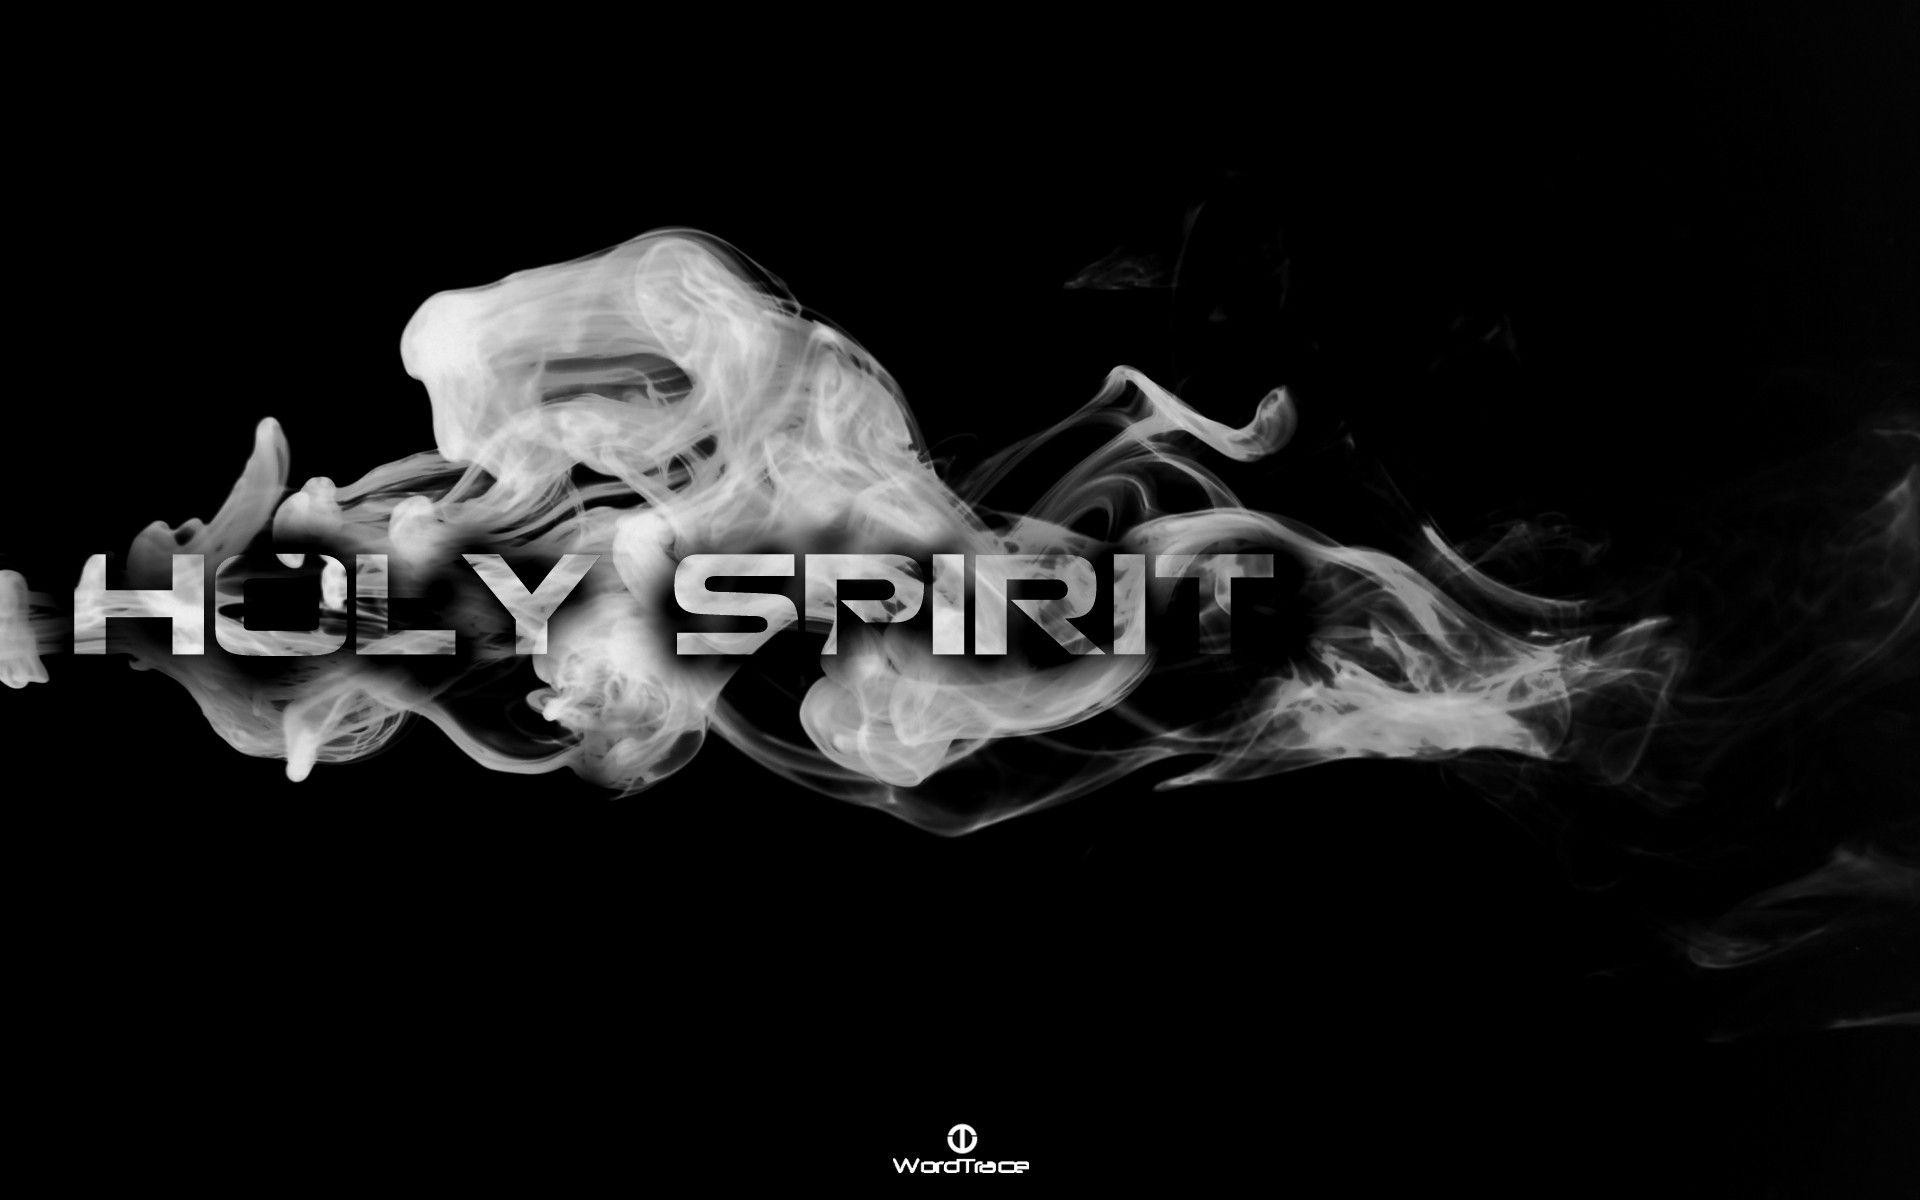 The Holy Spirit - Bible Verses and Scripture Wallpaper for Phone or Computer